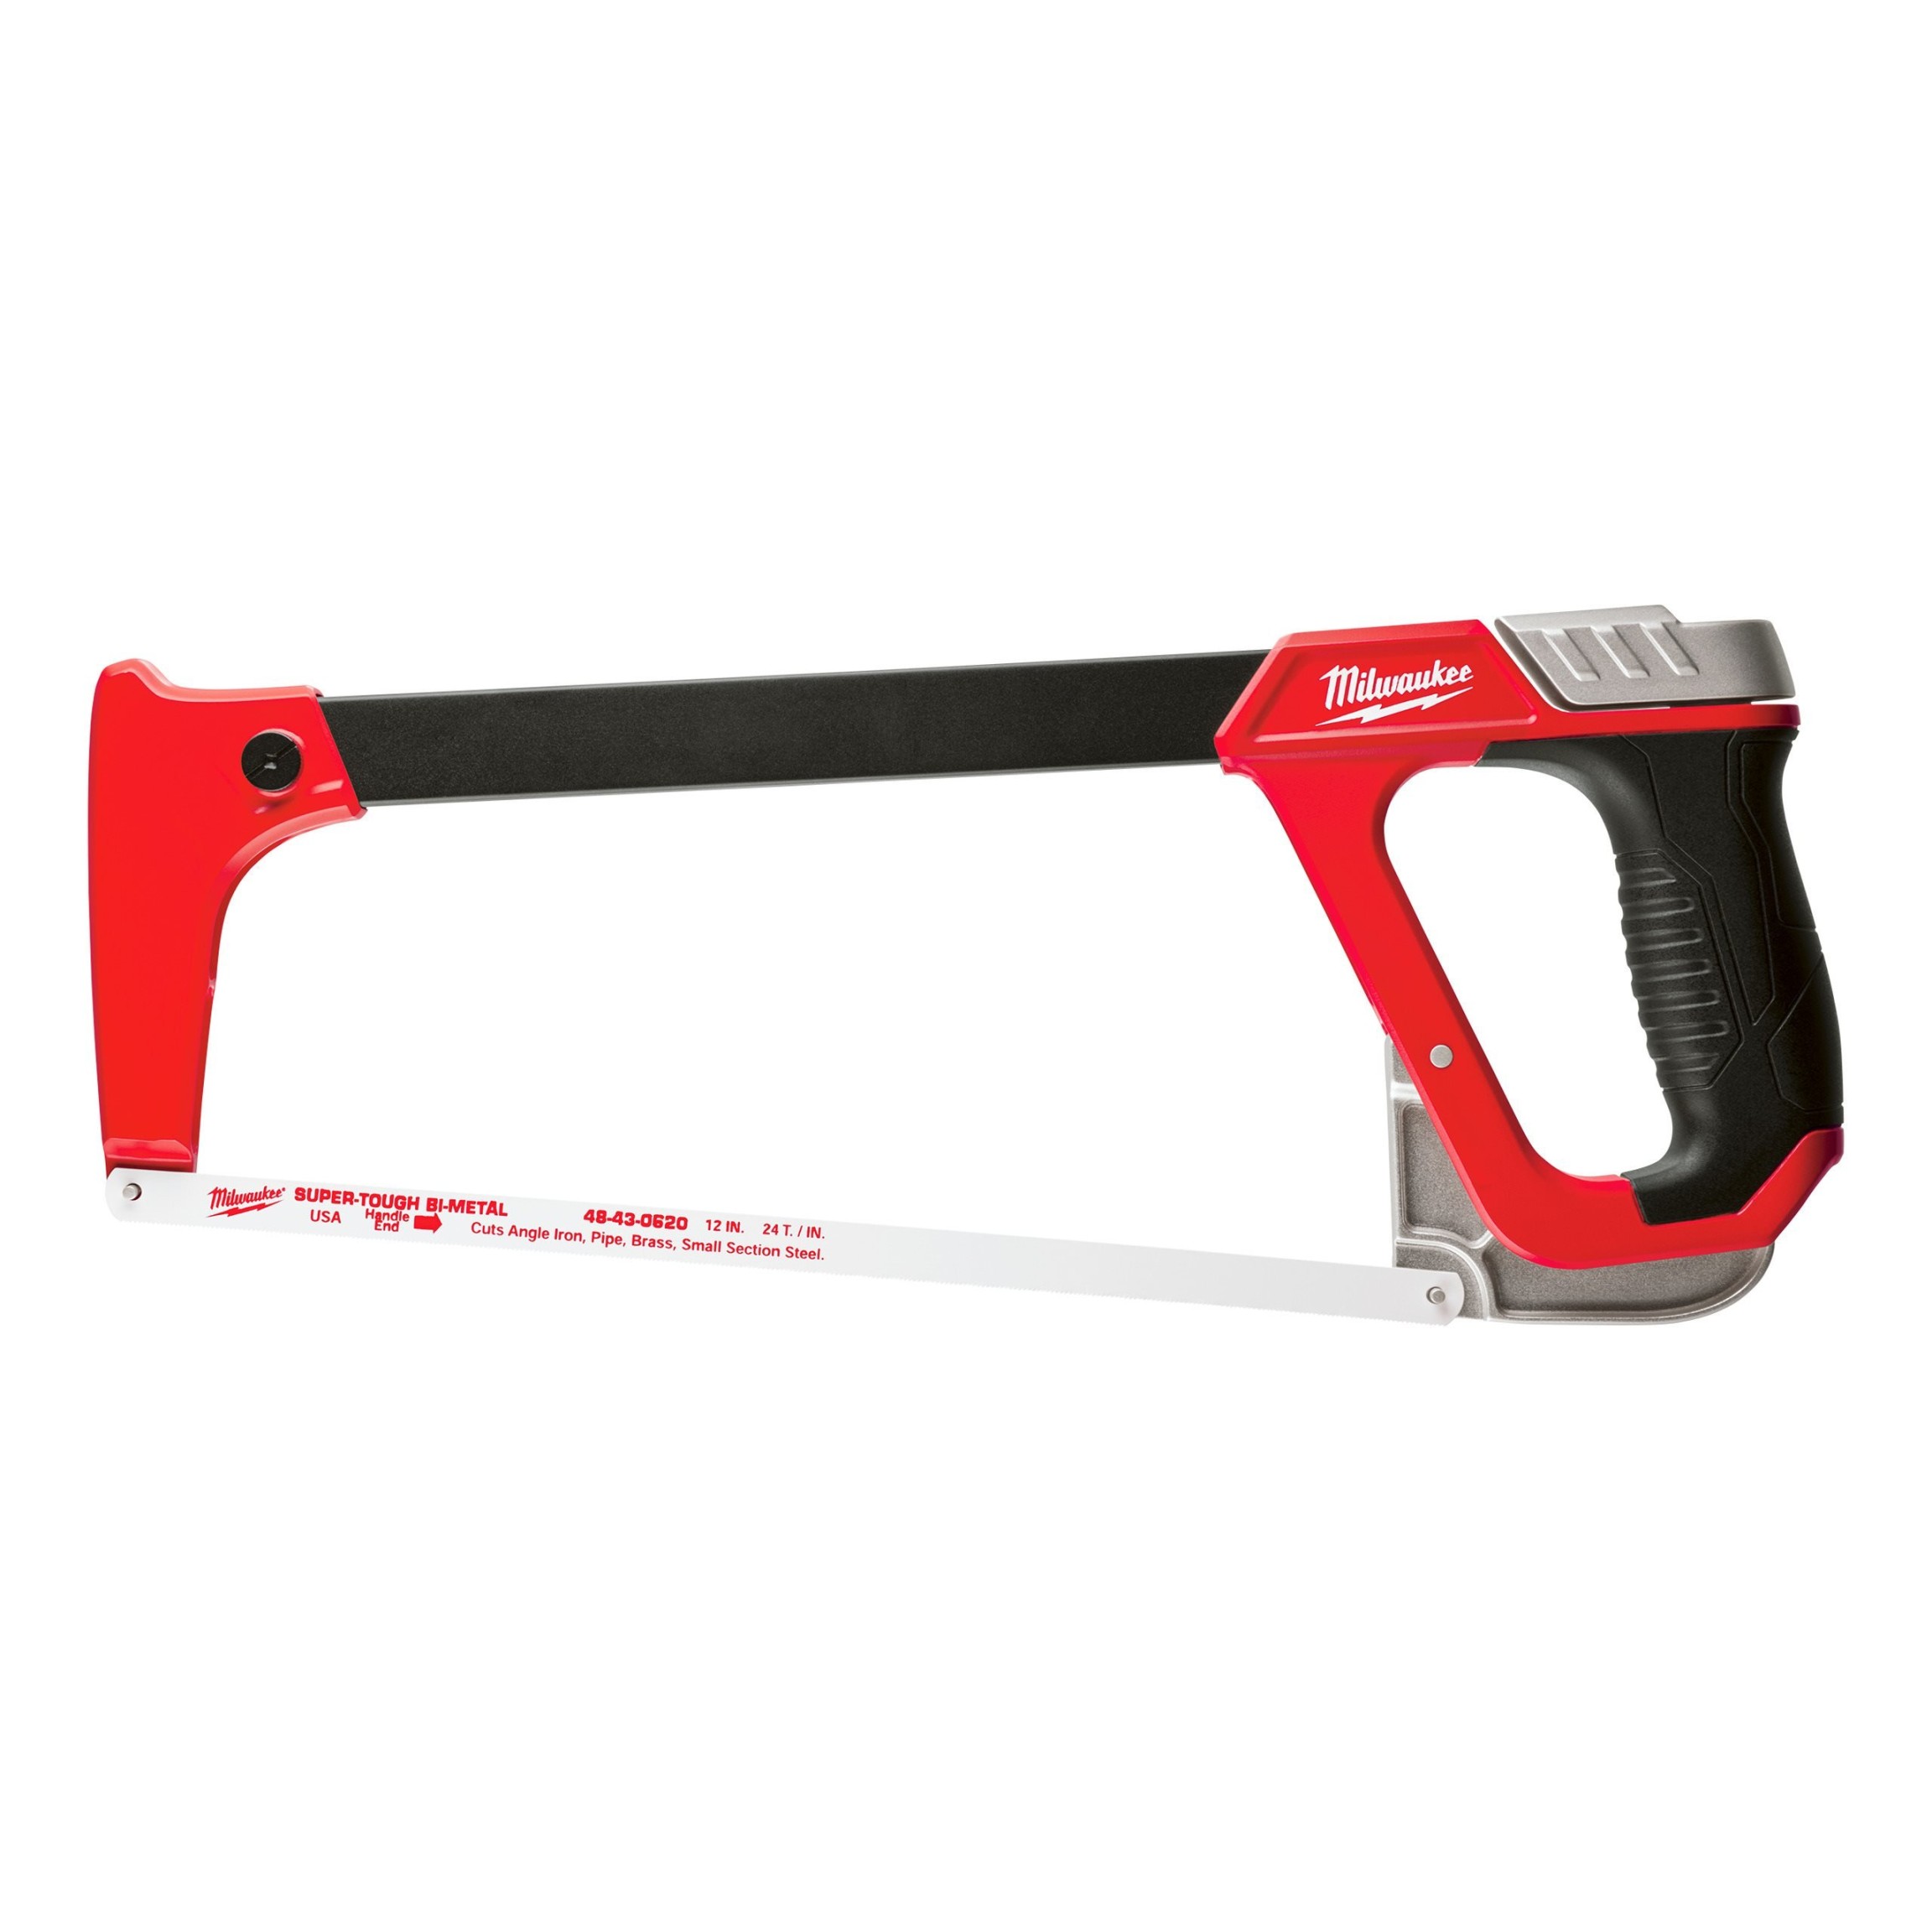 hand-bgelsge-milwaukee-tool-de Milwaukee Hand Saw Review: Cutting Through The Hype (Corded Vs. Cordless) picture